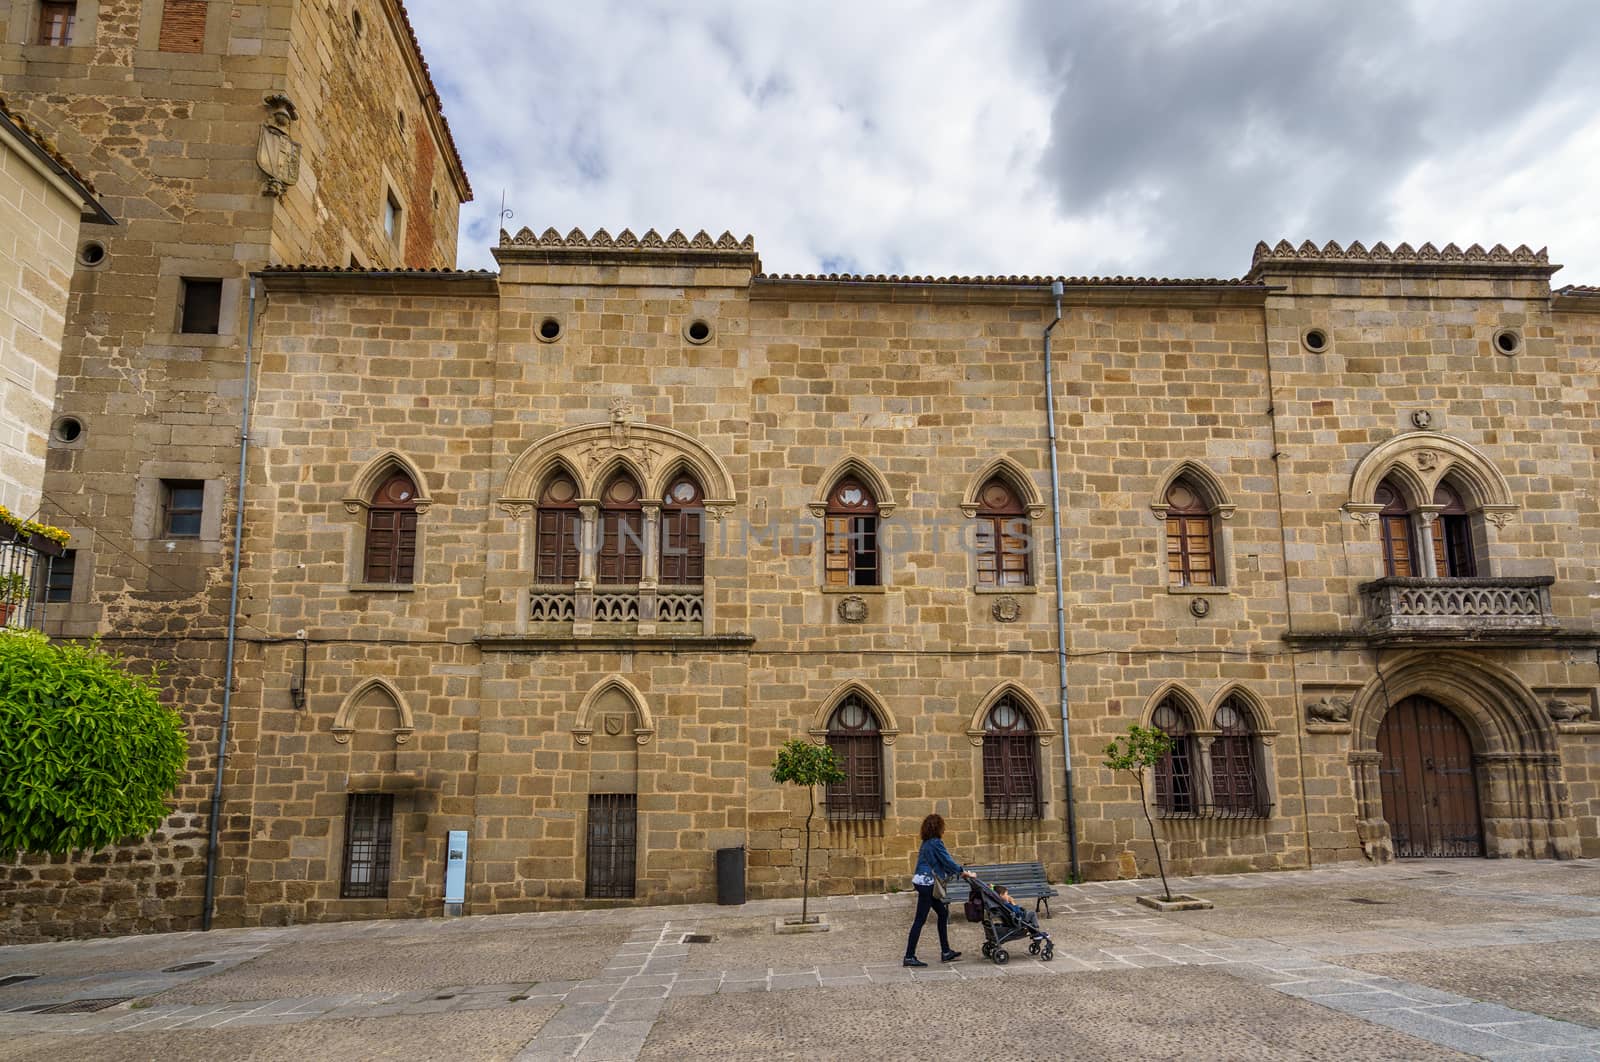 Main facade of the Monroy Palace or Casa de las Dos Torres in the historical center of the city of Plasencia, located in the region of Extremadura, Spain.